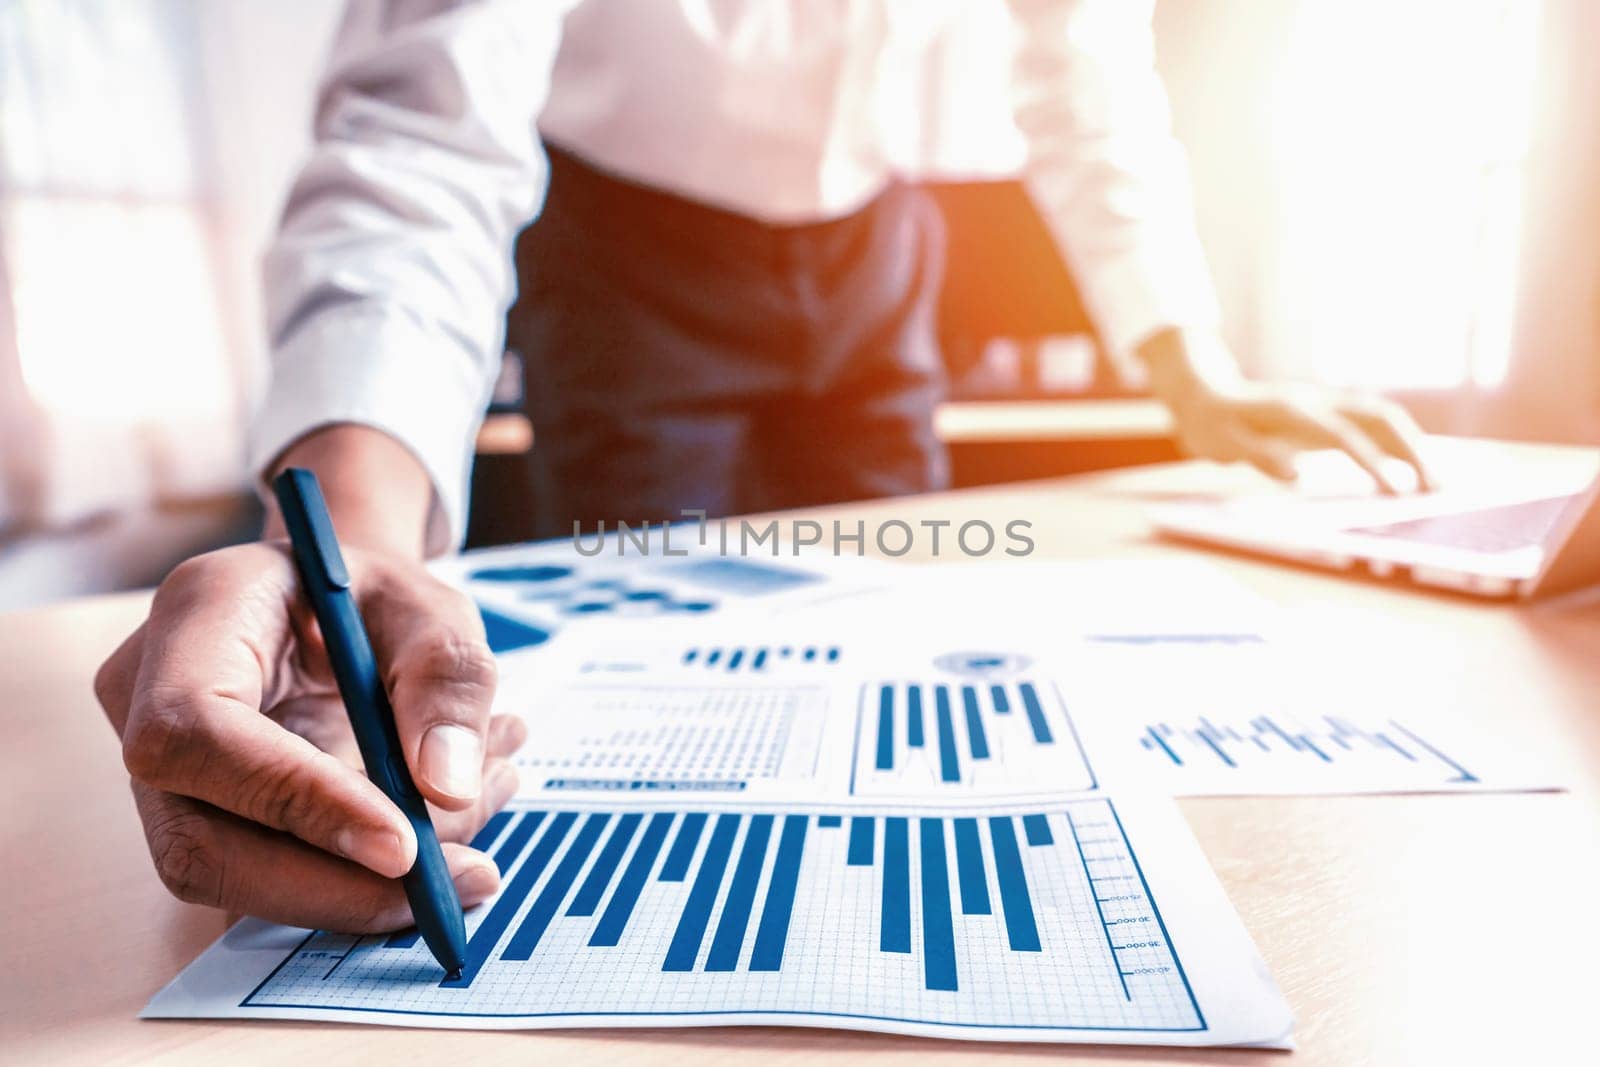 Businessman accountant or financial expert analyze business report graph and finance chart at corporate office. Concept of finance economy, banking business and stock market research. uds